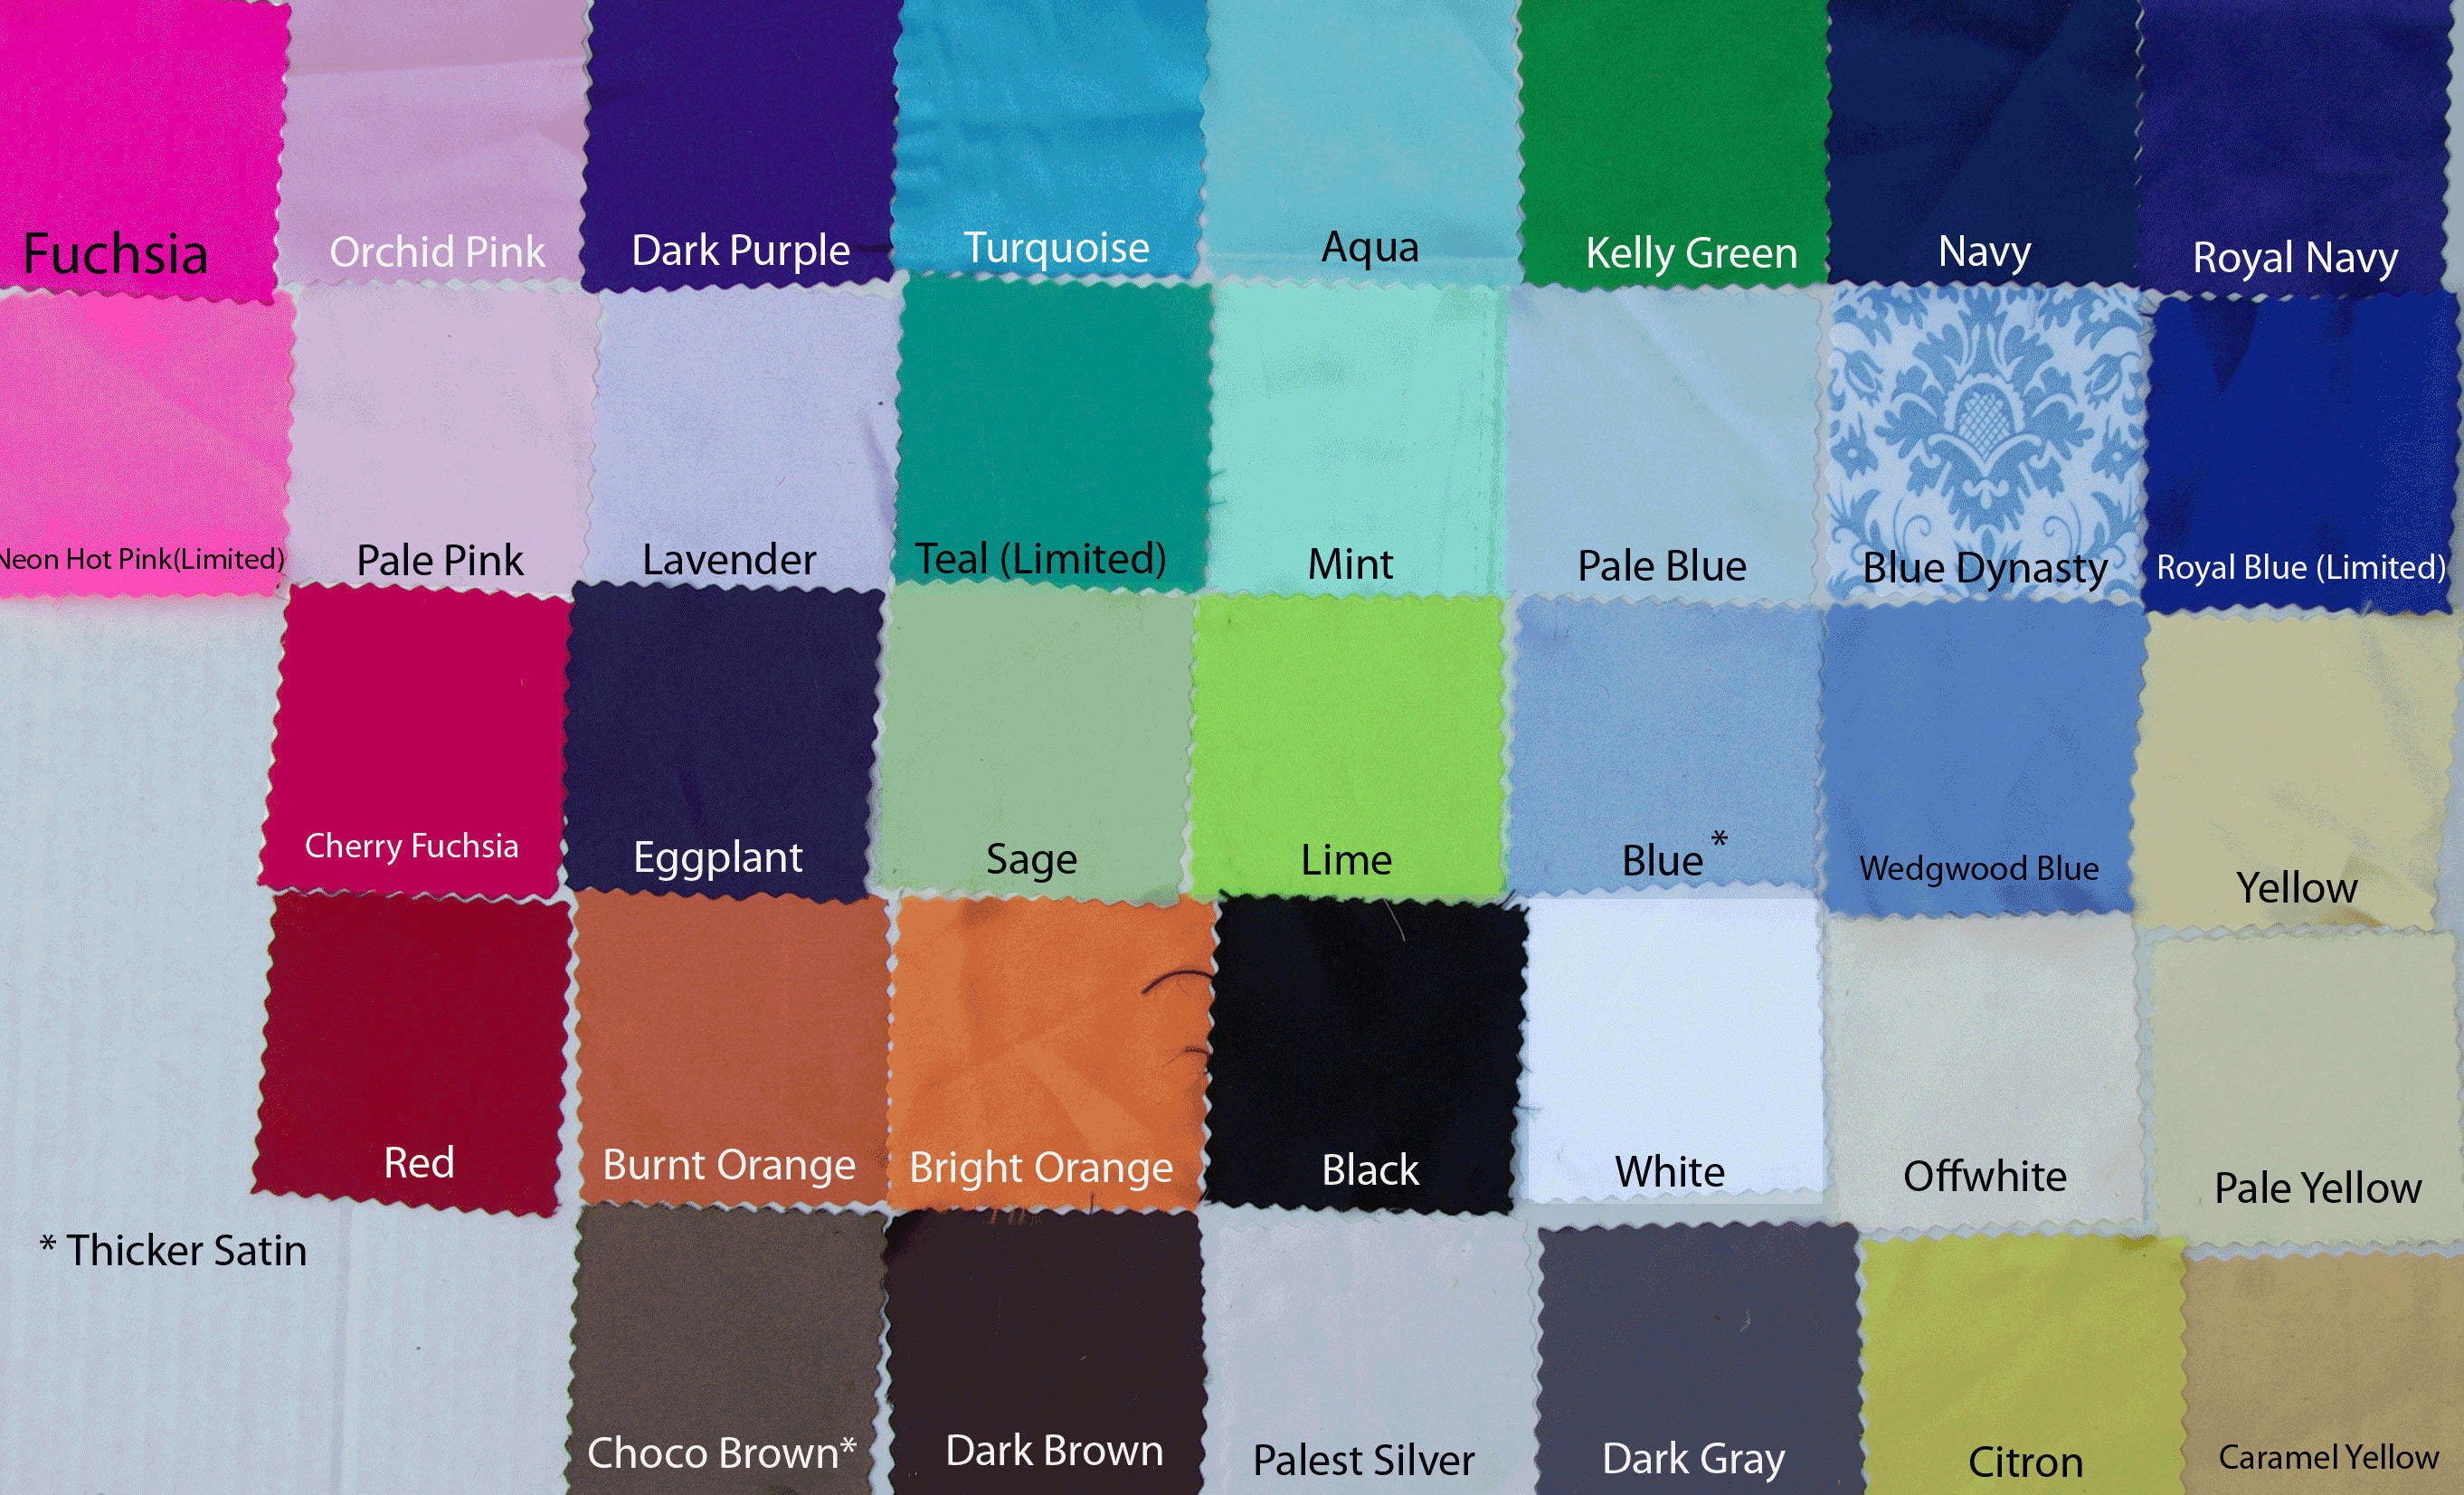 All Satin Baby Blanket - NO FILL - Create Your Own 33 x 33 dreamy ...